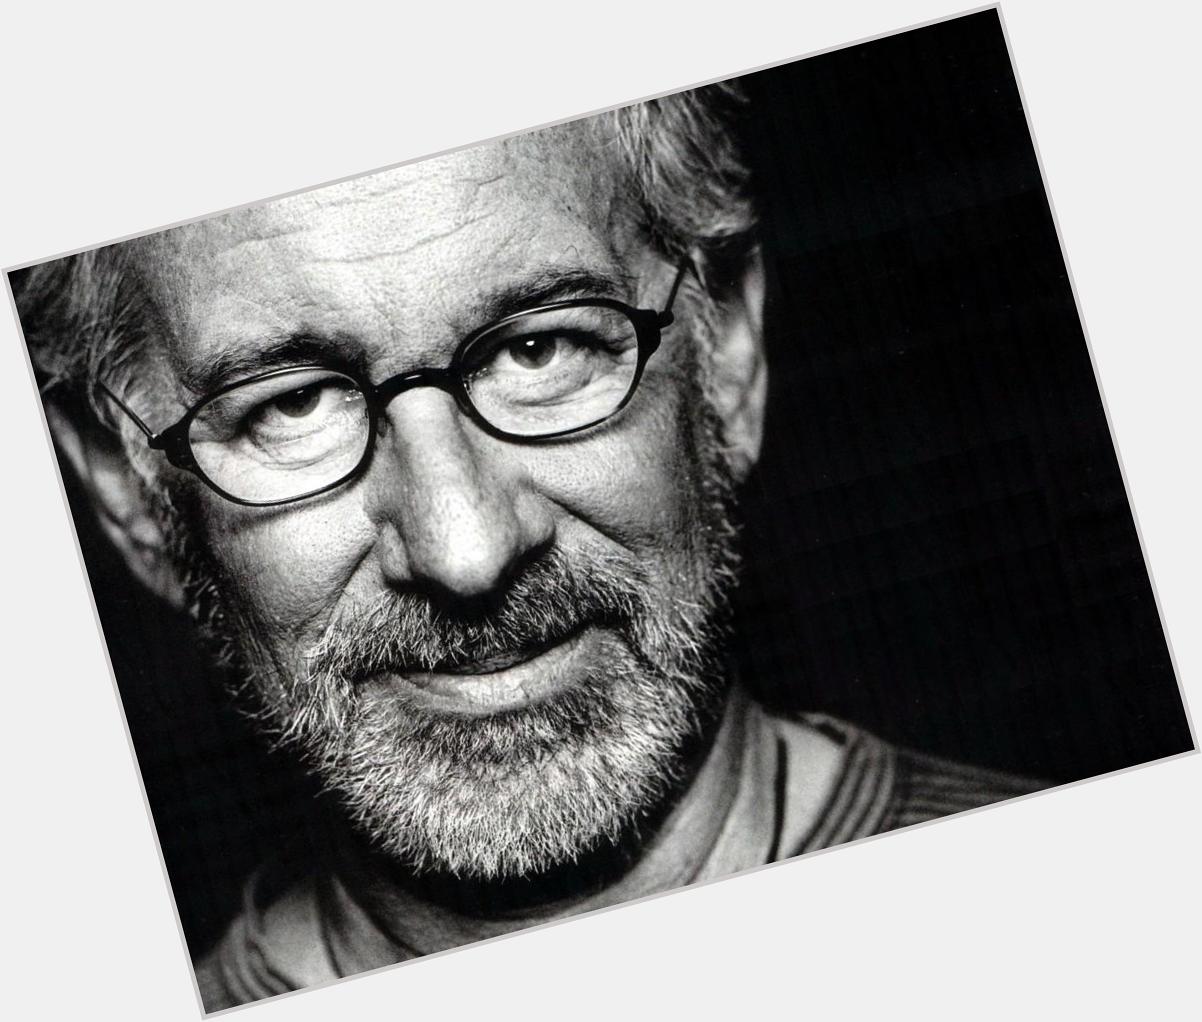 Happy Birthday to my favorite director and idol Steven Spielberg! I strive to one day make films as beloved as his. 